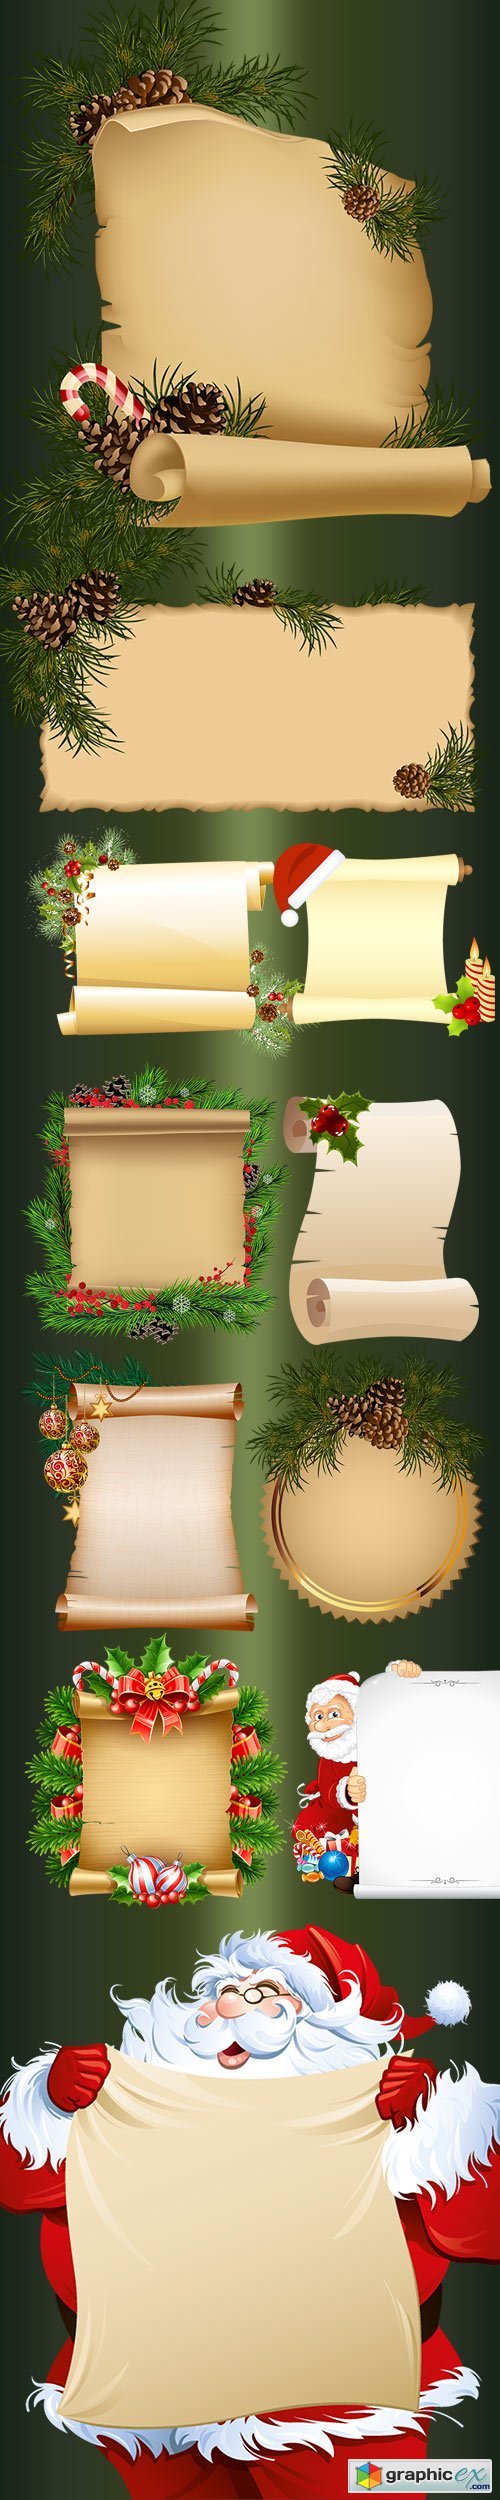 New year's scrolls PSD Clipart